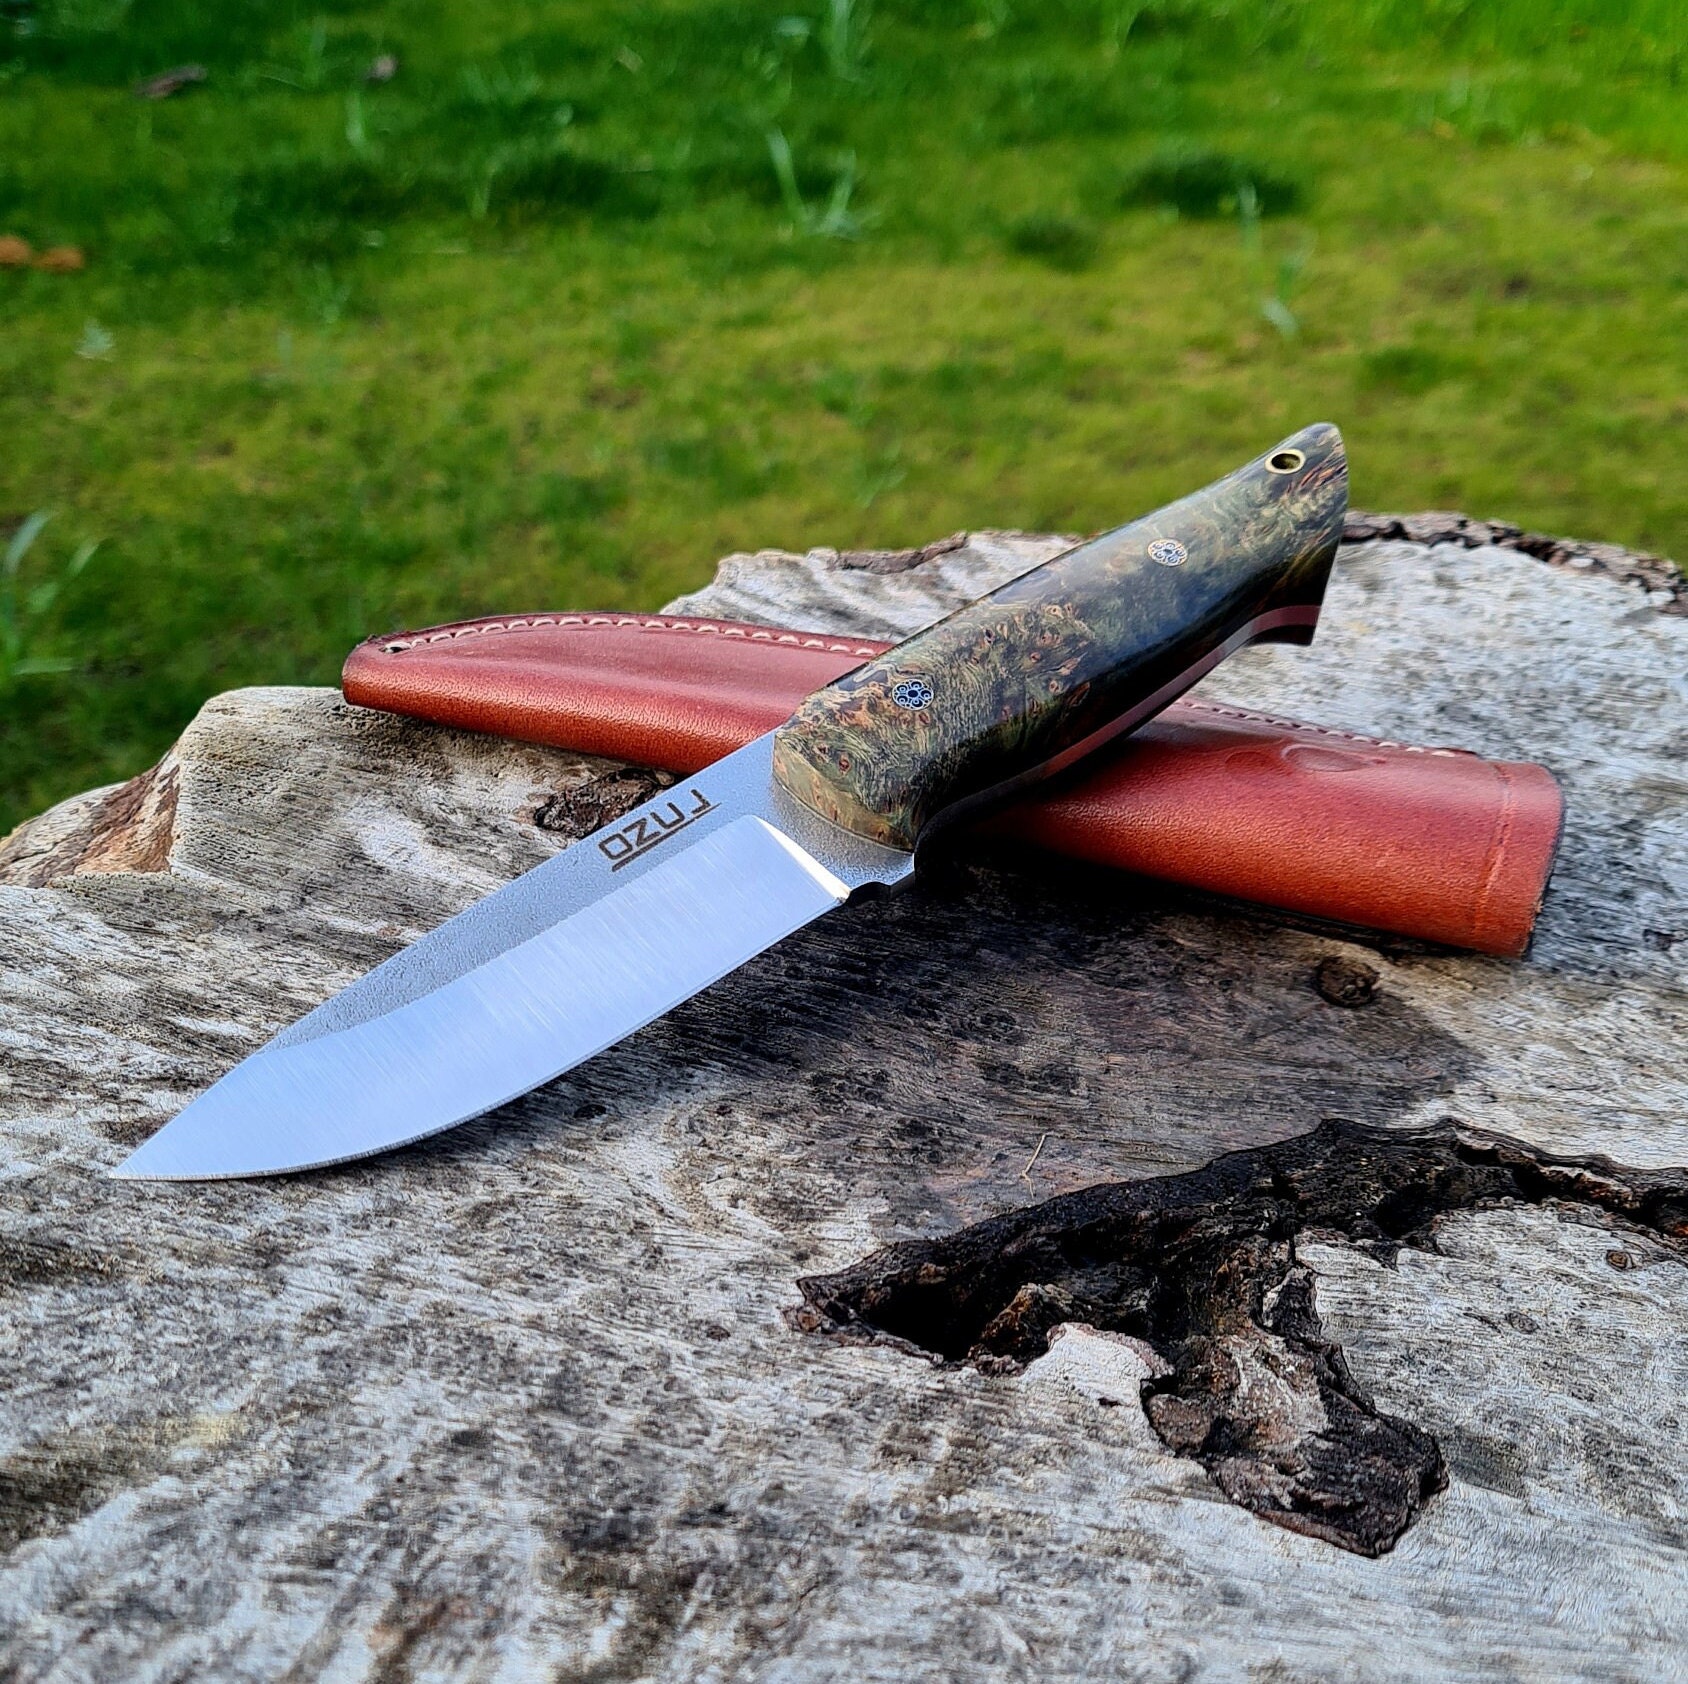 The 1,000+ Year Old Viking Knife Design By Helle Knives Of Norway